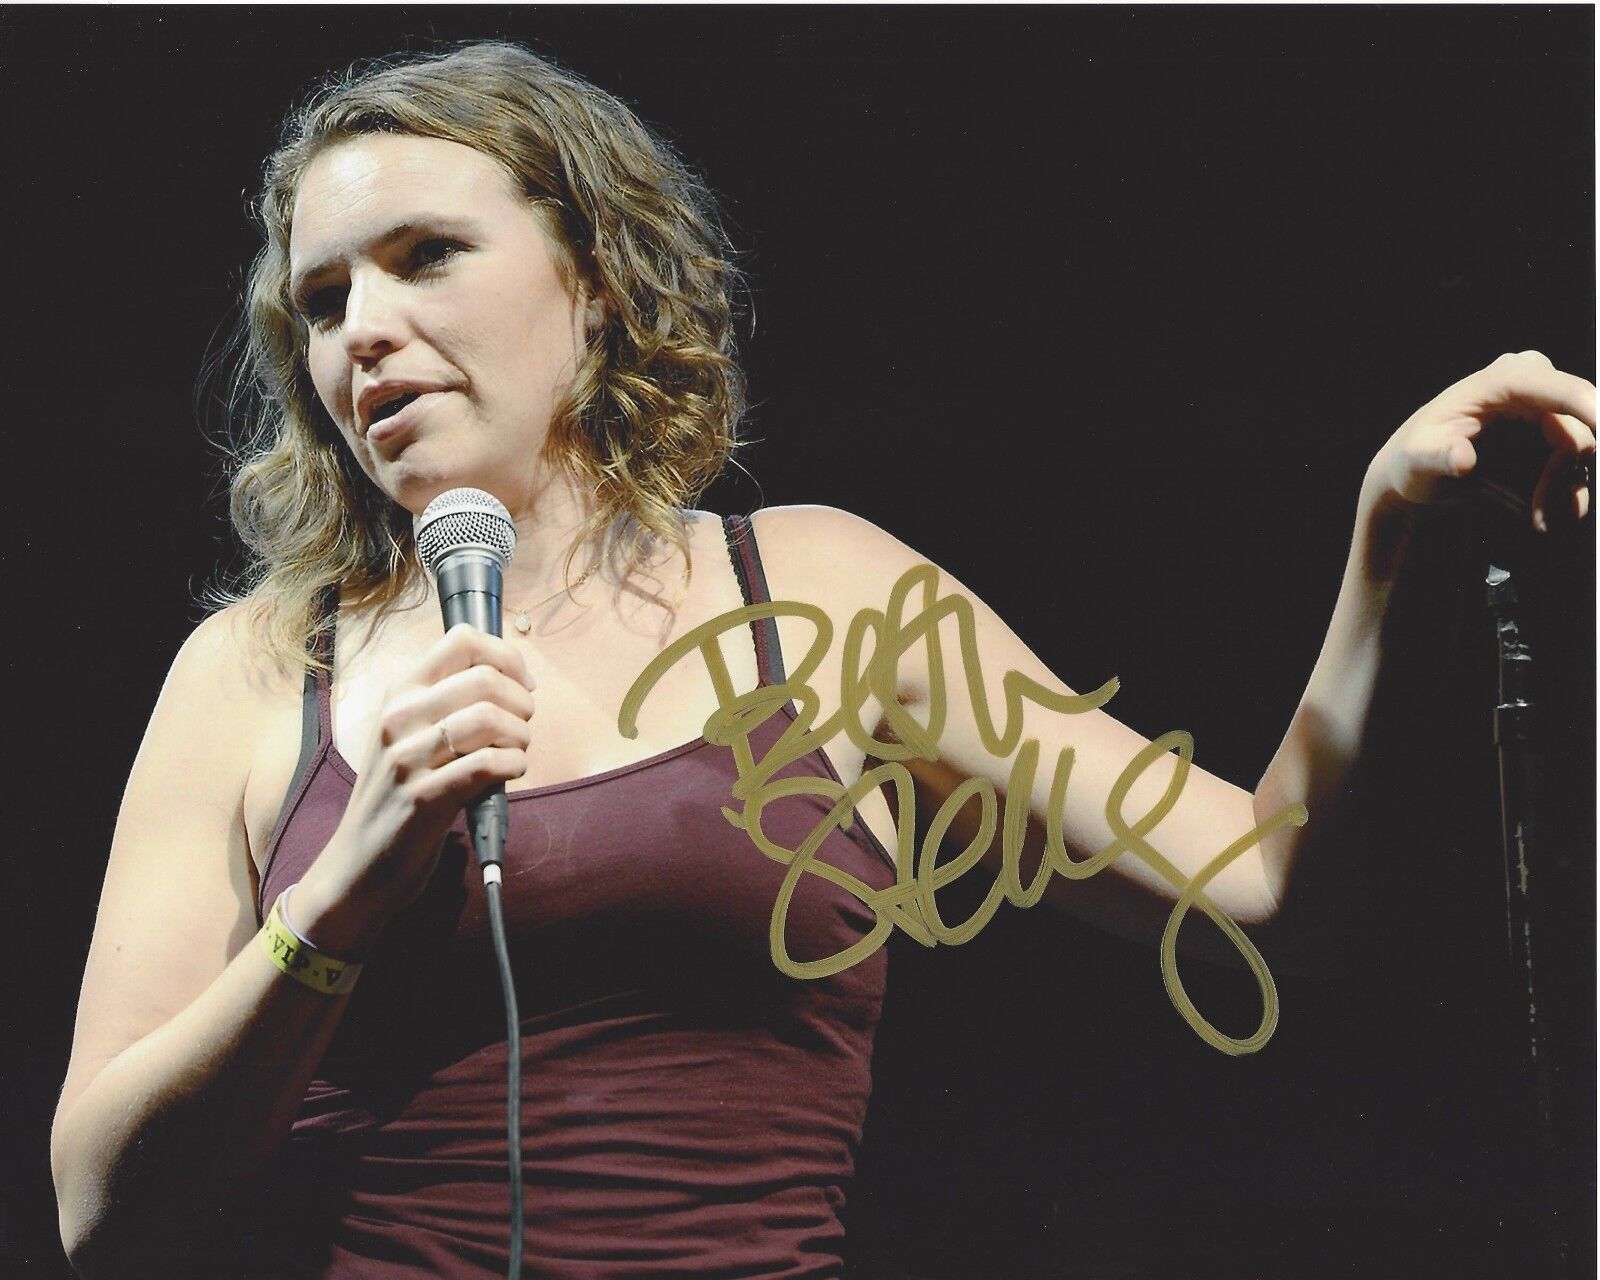 COMEDIAN BETH STELLING SIGNED 8x10 Photo Poster painting D w/COA NETFLIX THE STANDUPS LIVE